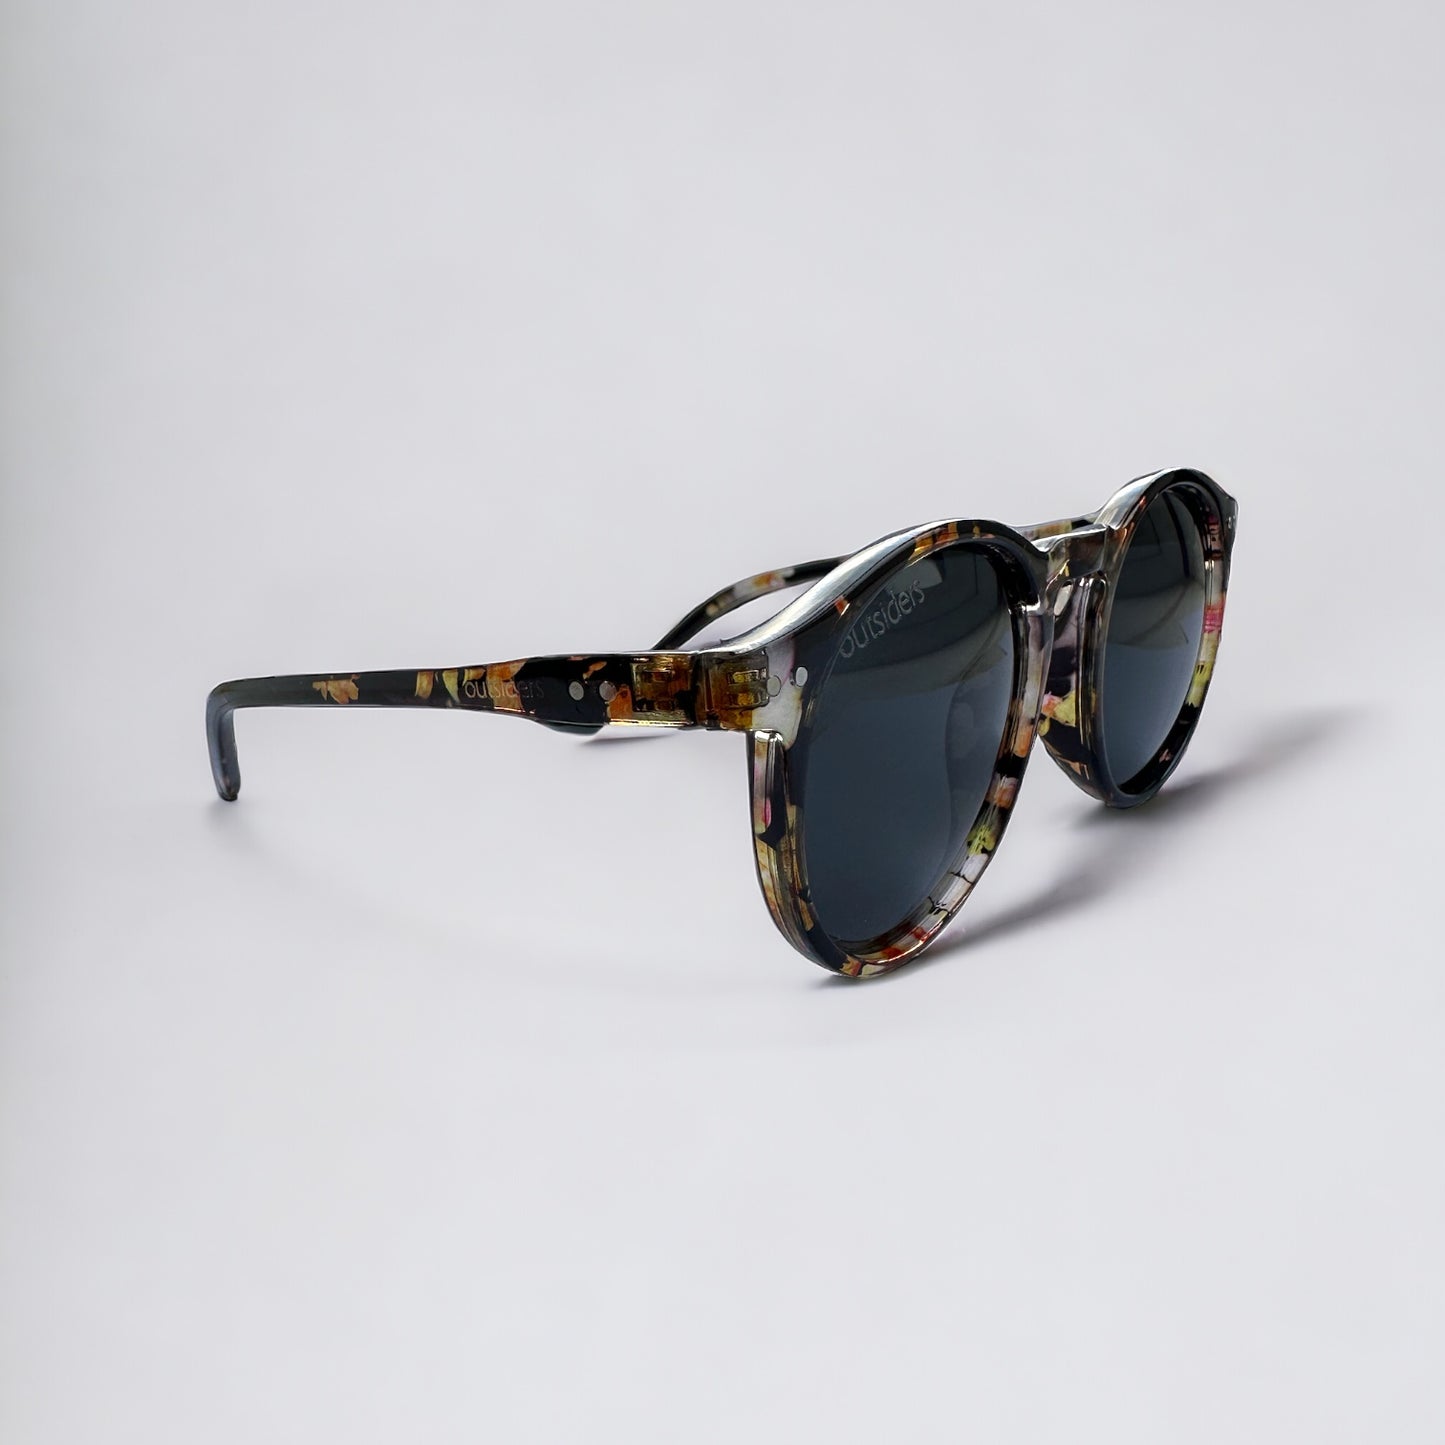 Outsiders Deck Sunglasses - Floral